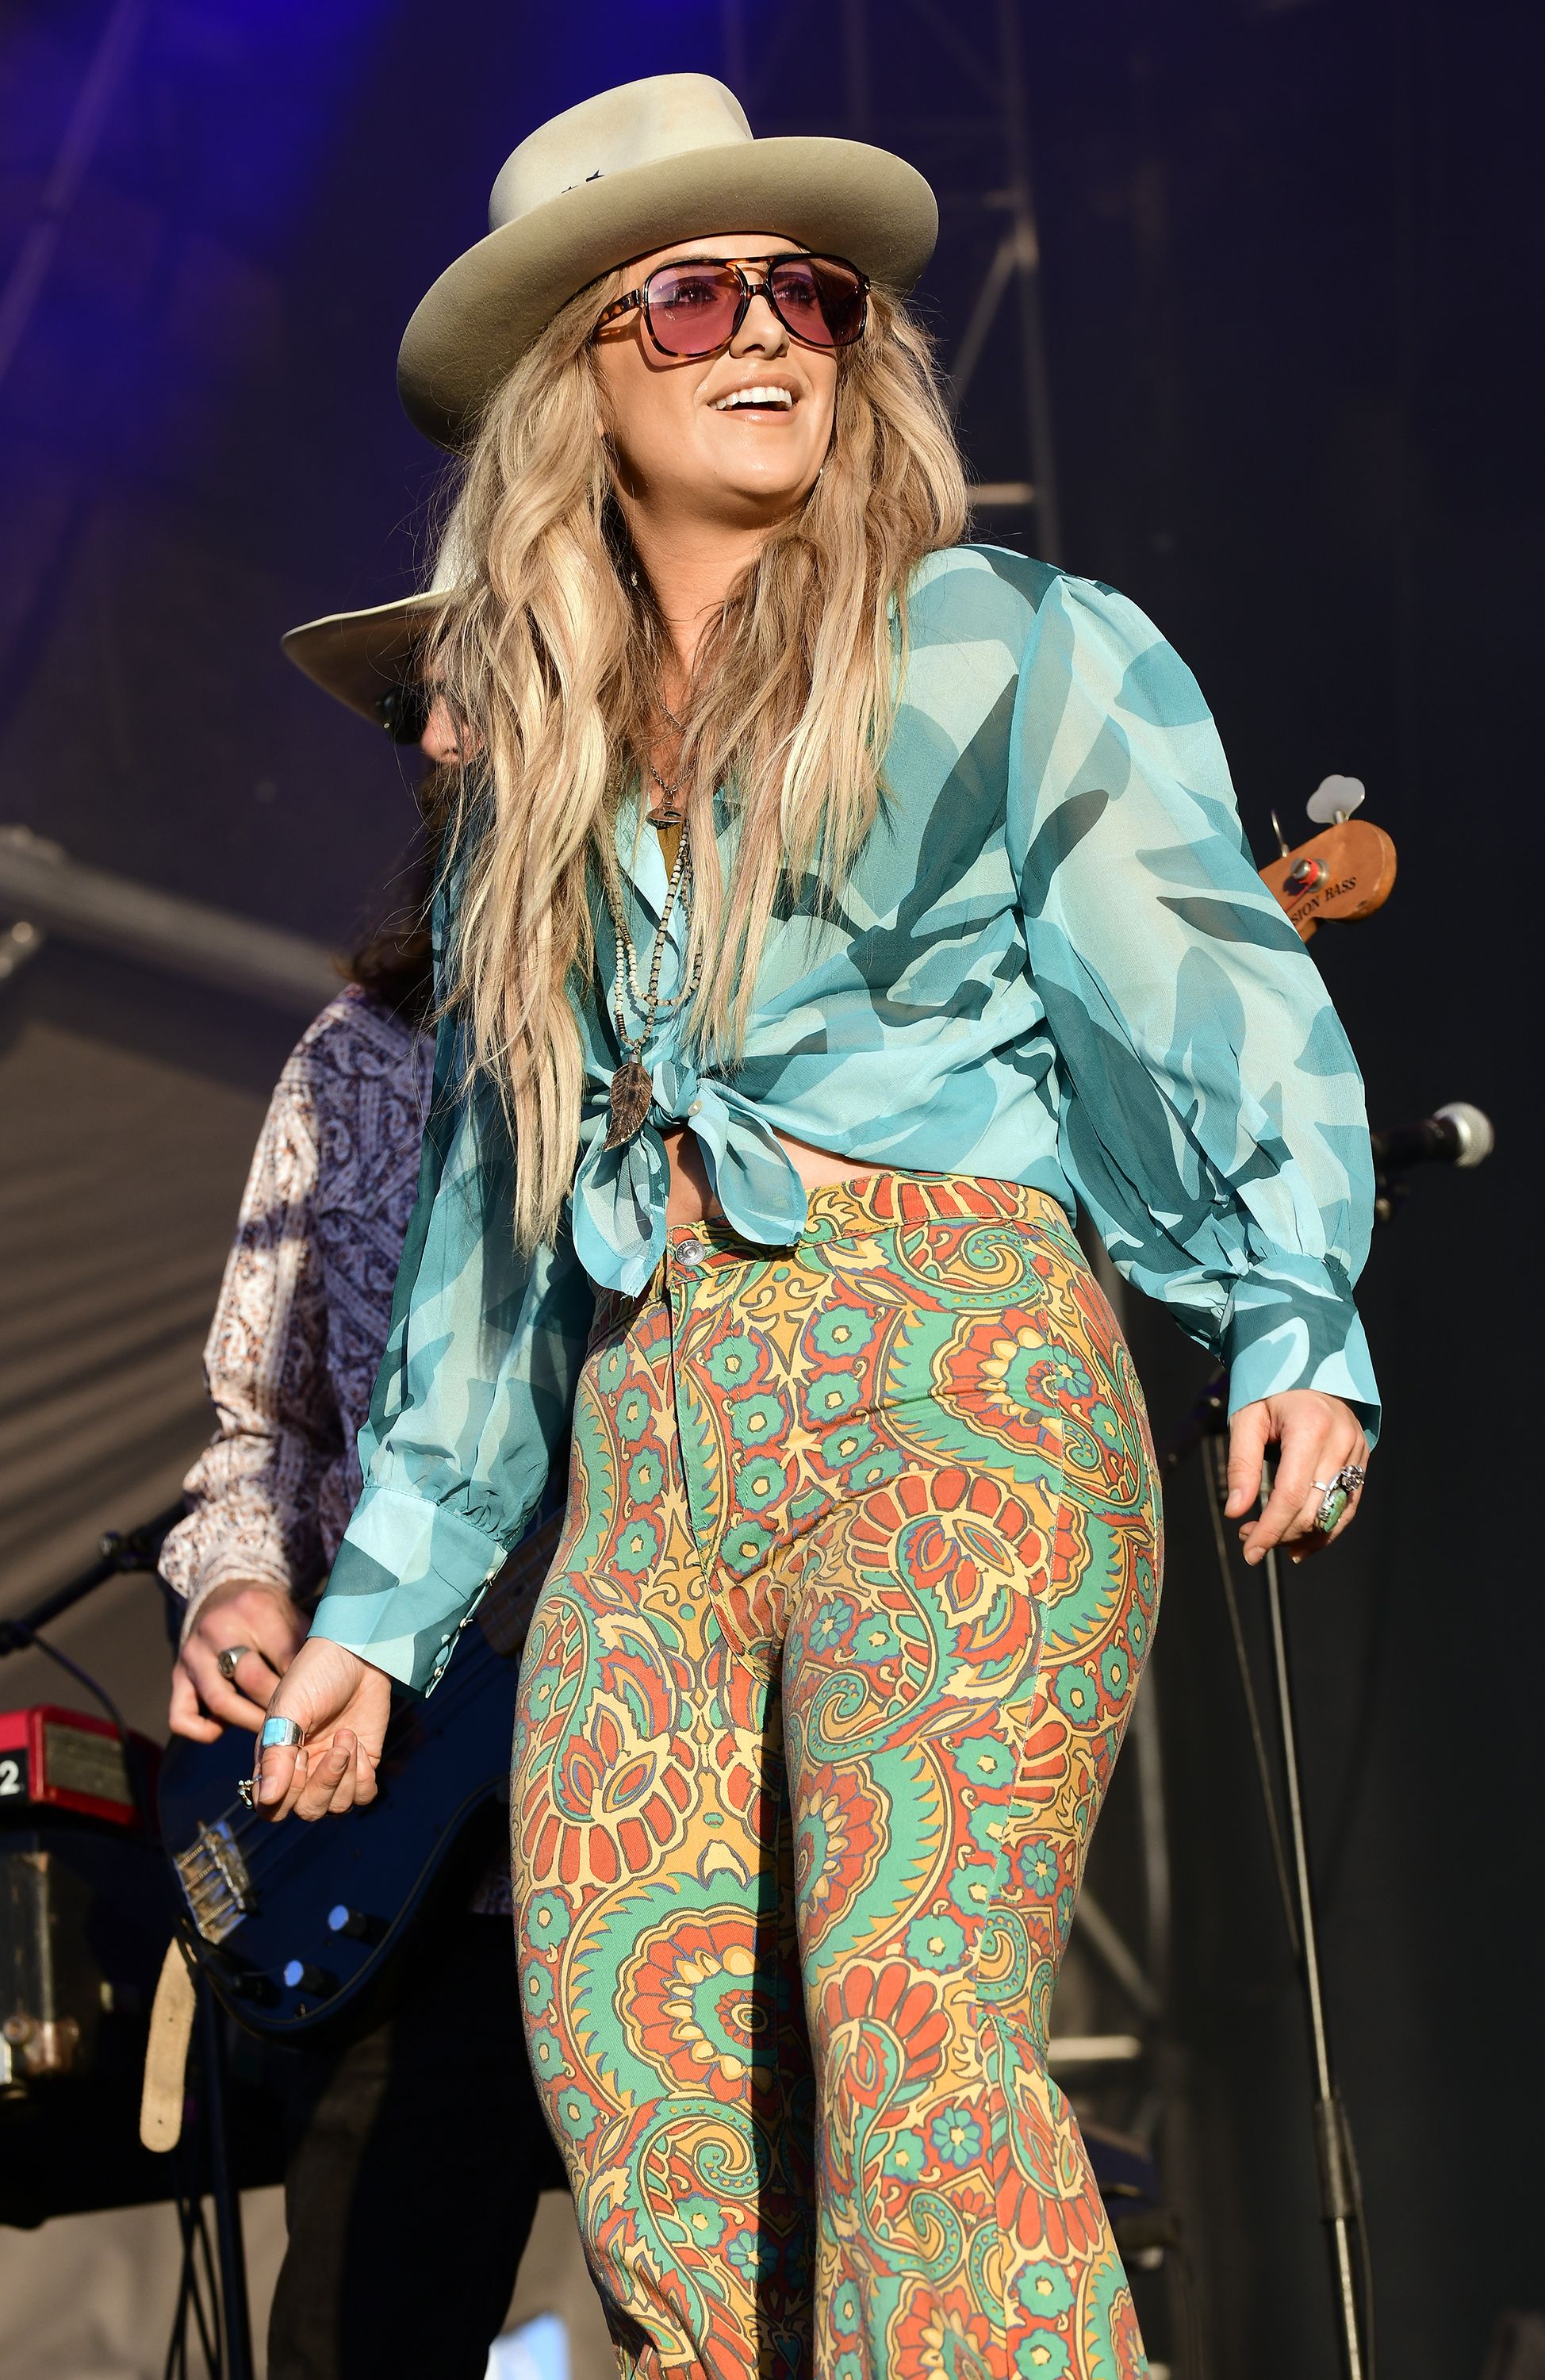 See Lainey Wilson Stun on Stage in a Crop Top and Bell Bottoms